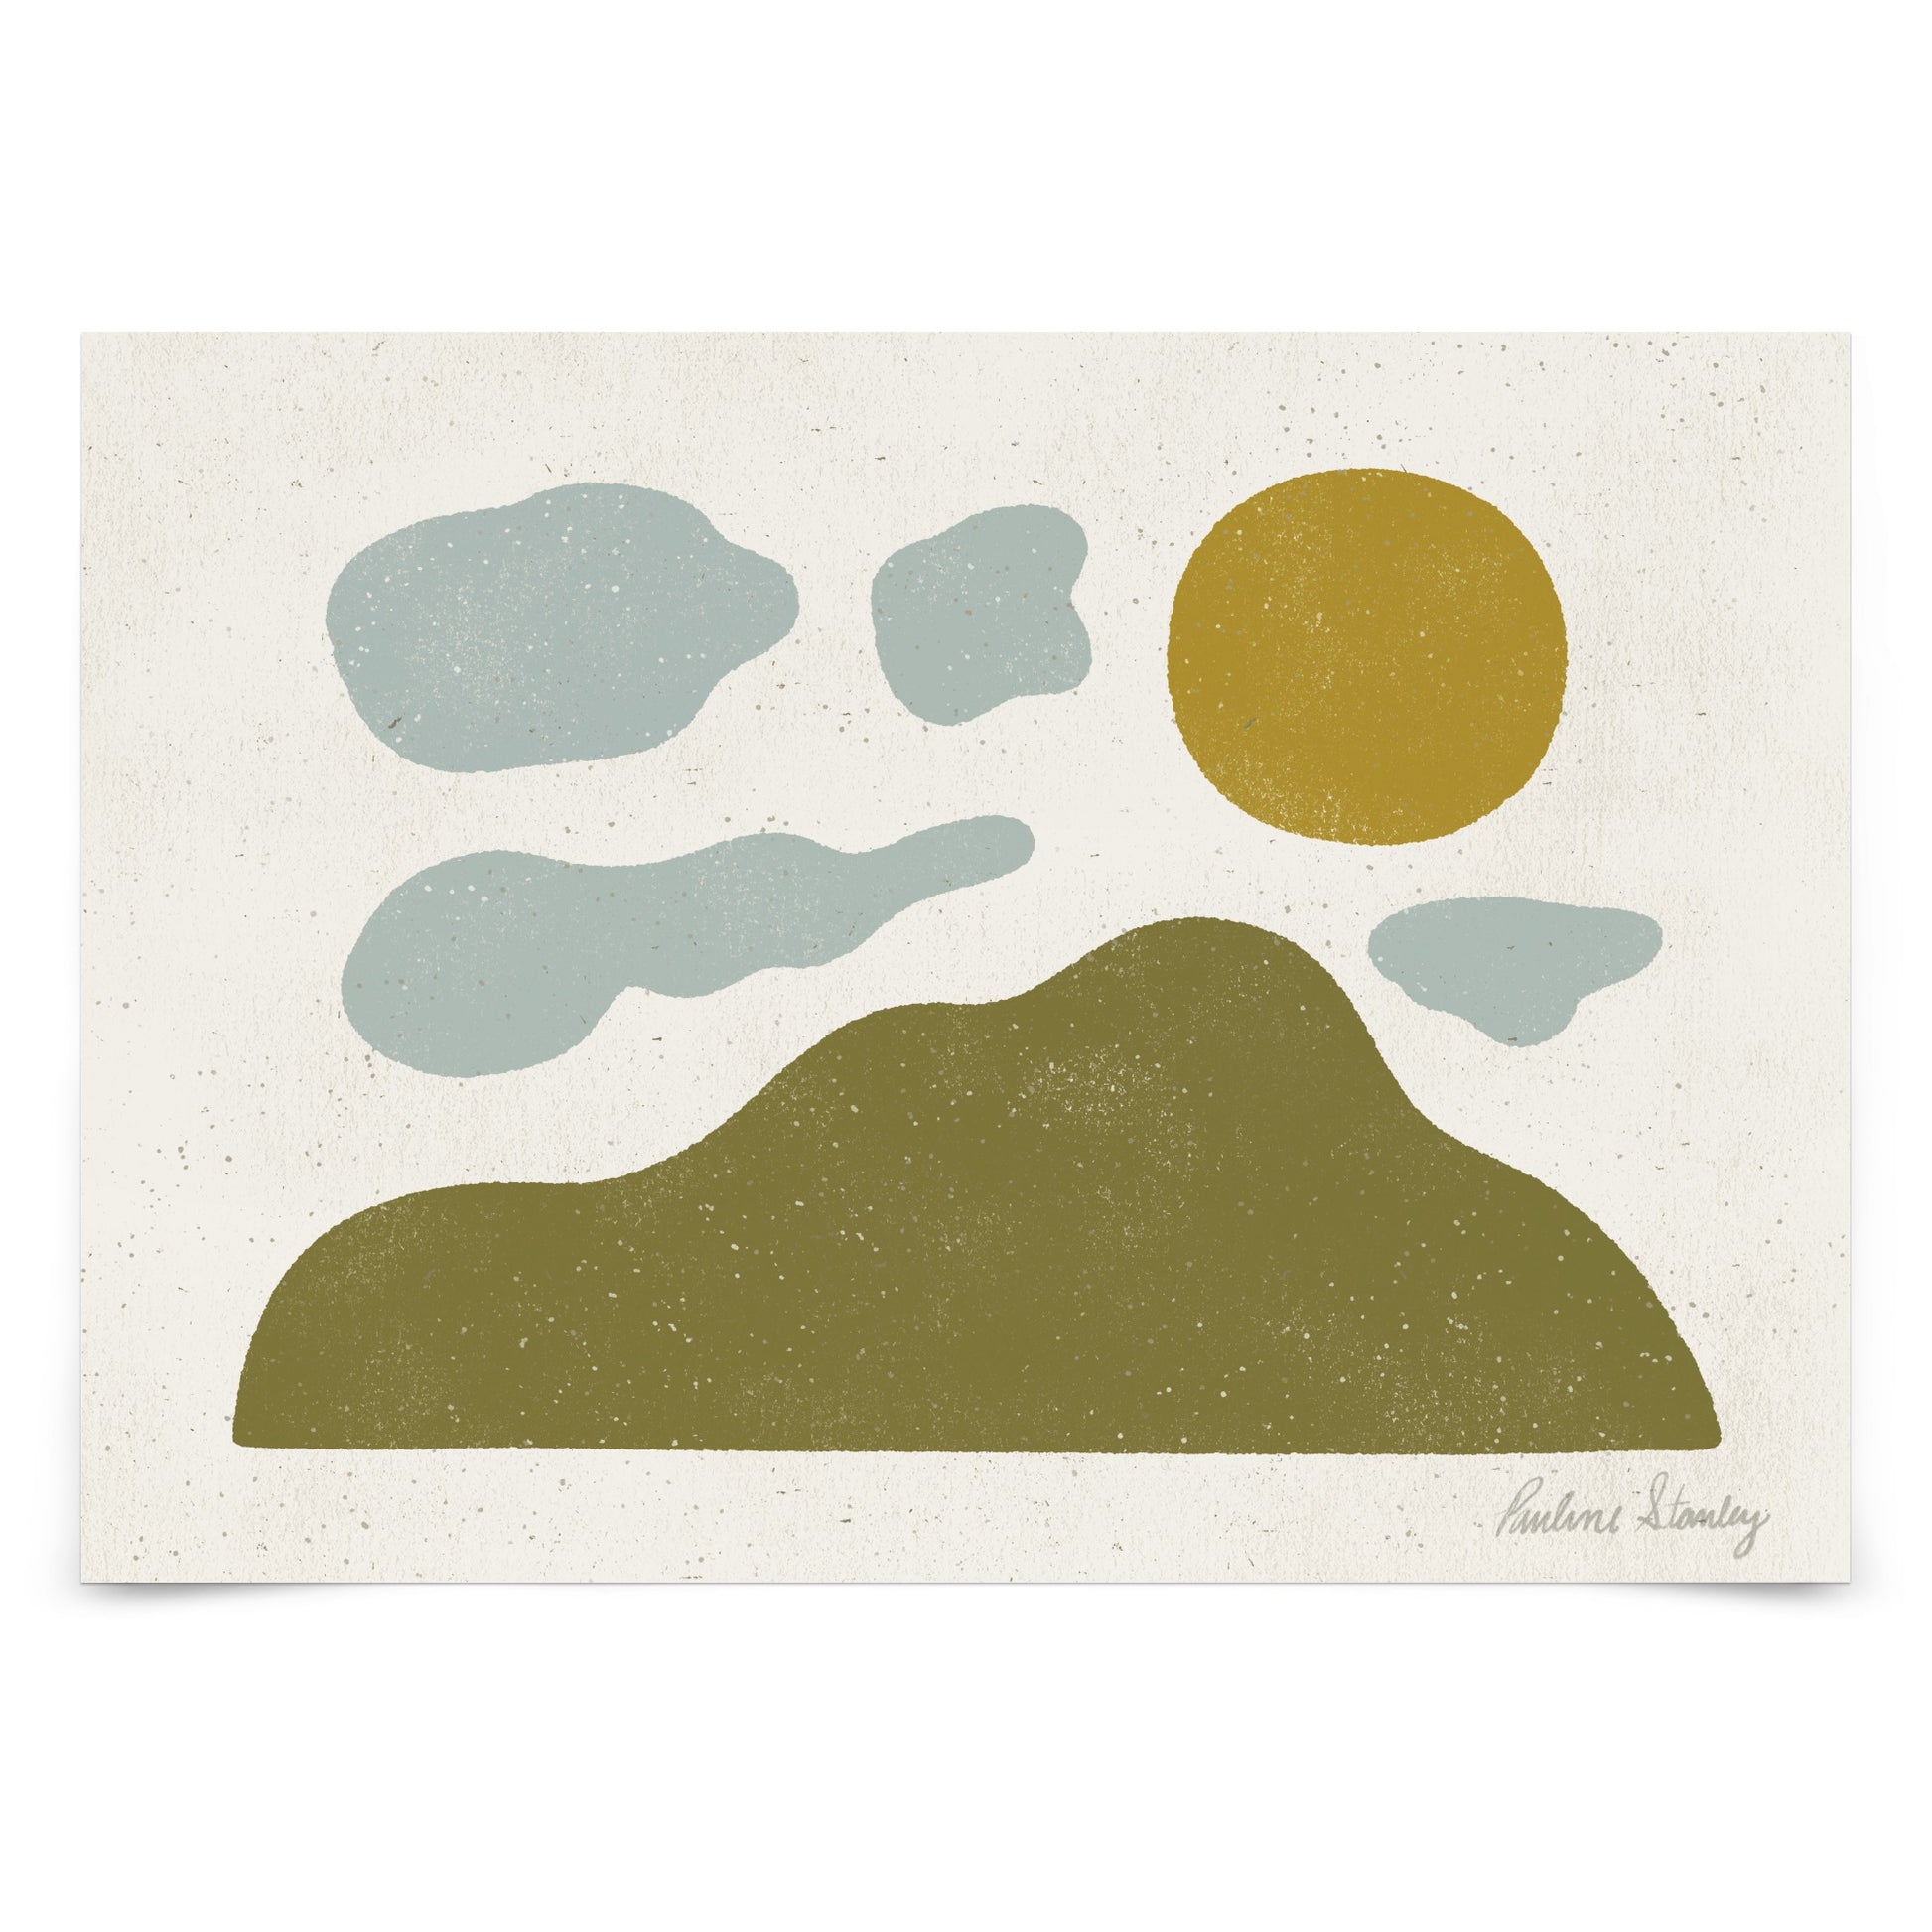 Mountain Clouds Sun by Pauline Stanley - Poster, Poster, 8" X 10"